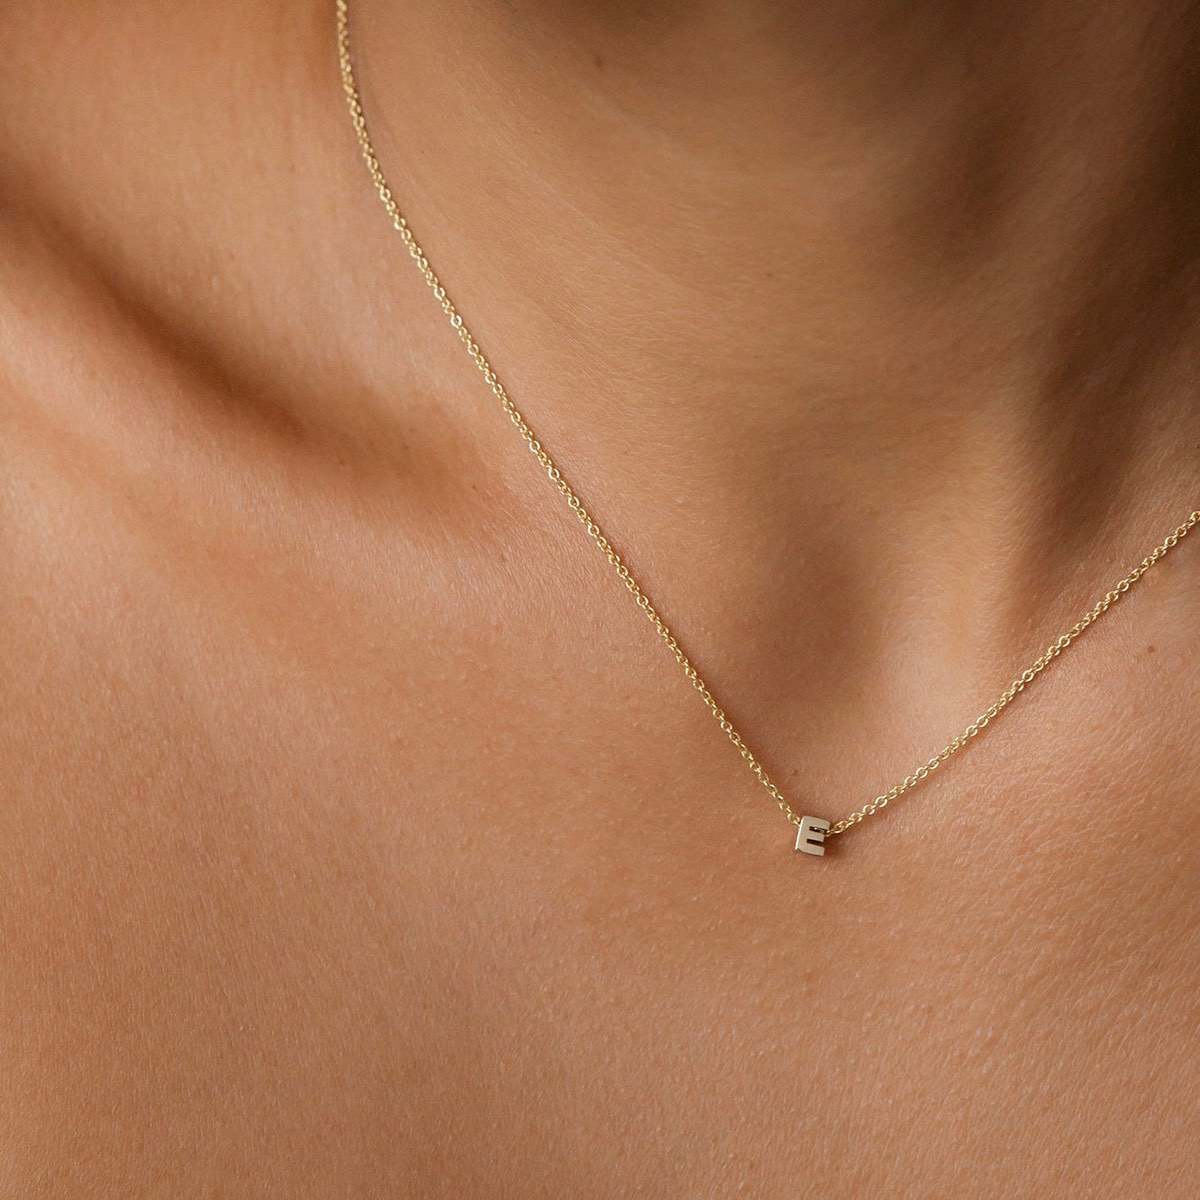 Hand finished solid gold letter necklace: Close up of a model wearing our beautiful 9ct yellow gold Tiny Letter E Charm Necklace with a 40cm cable chain